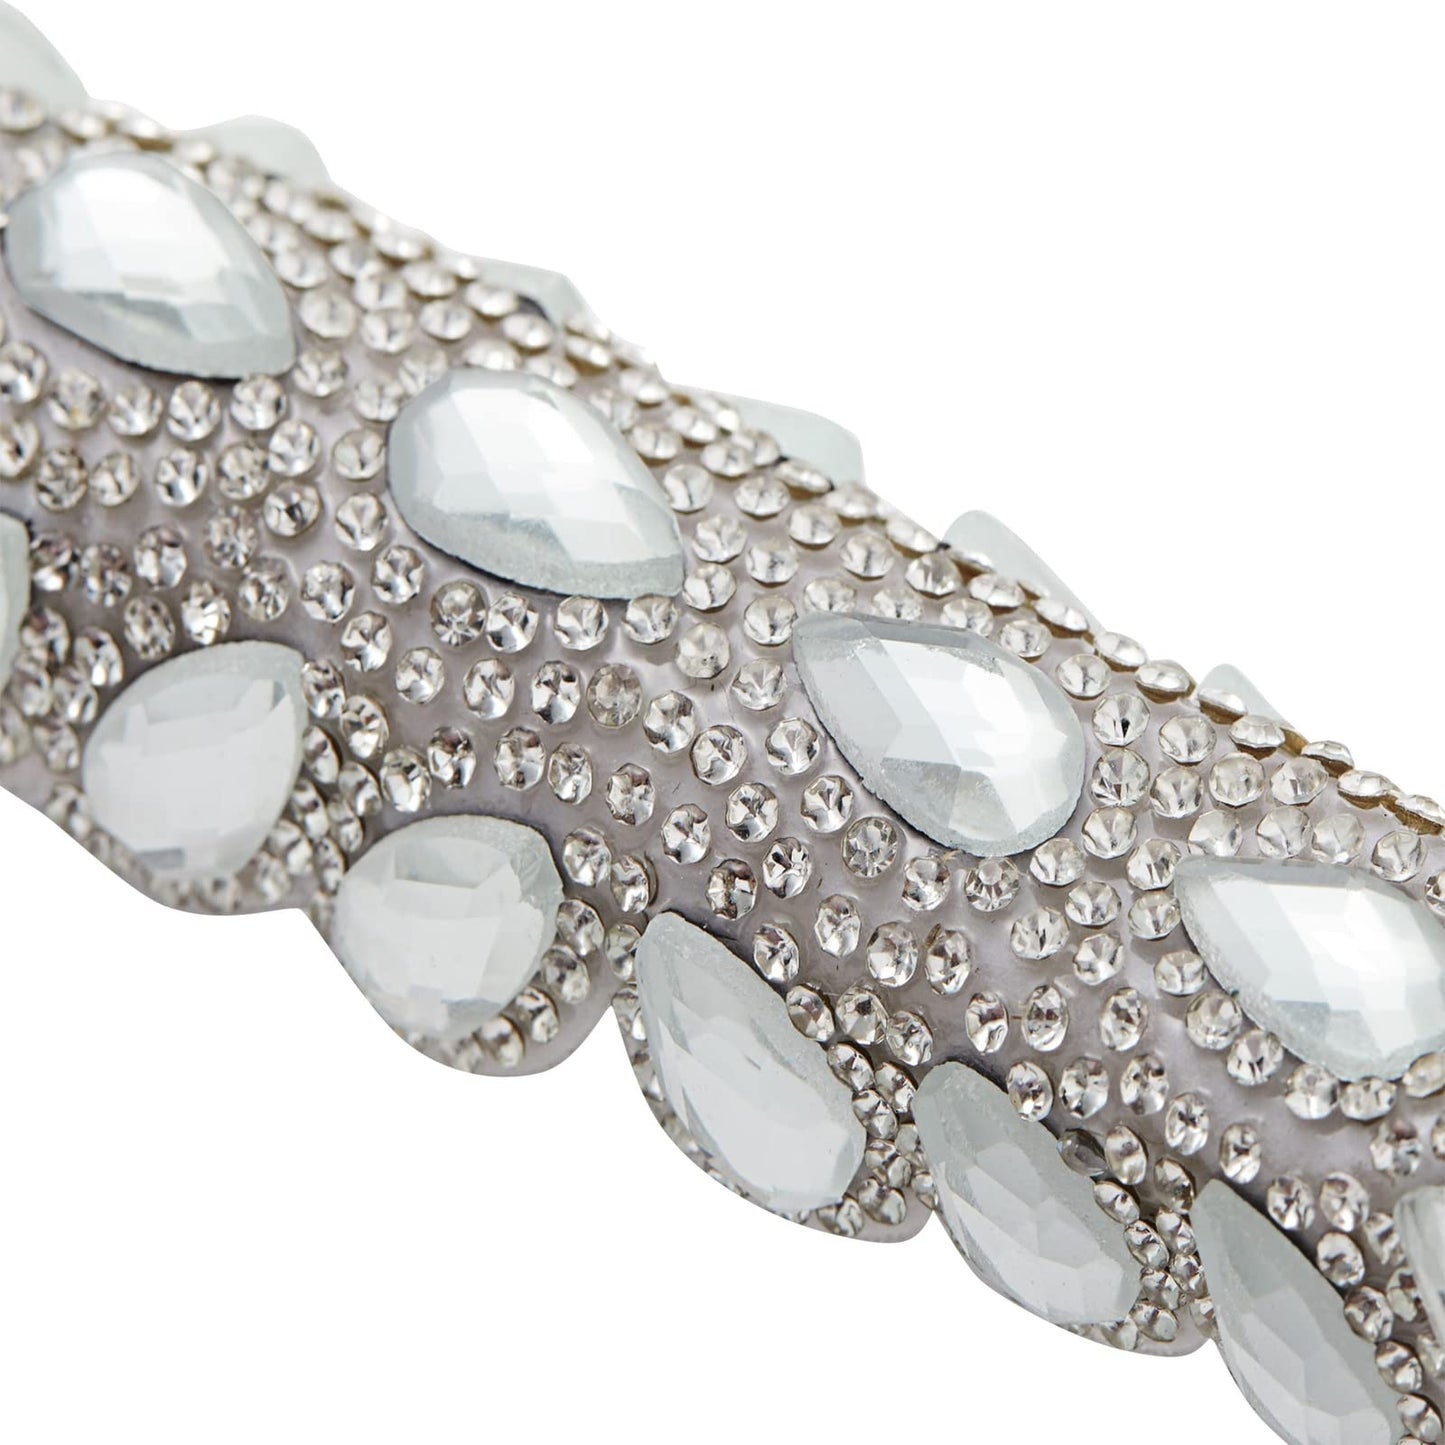 Embellished with Faux Crystals, Diamonds